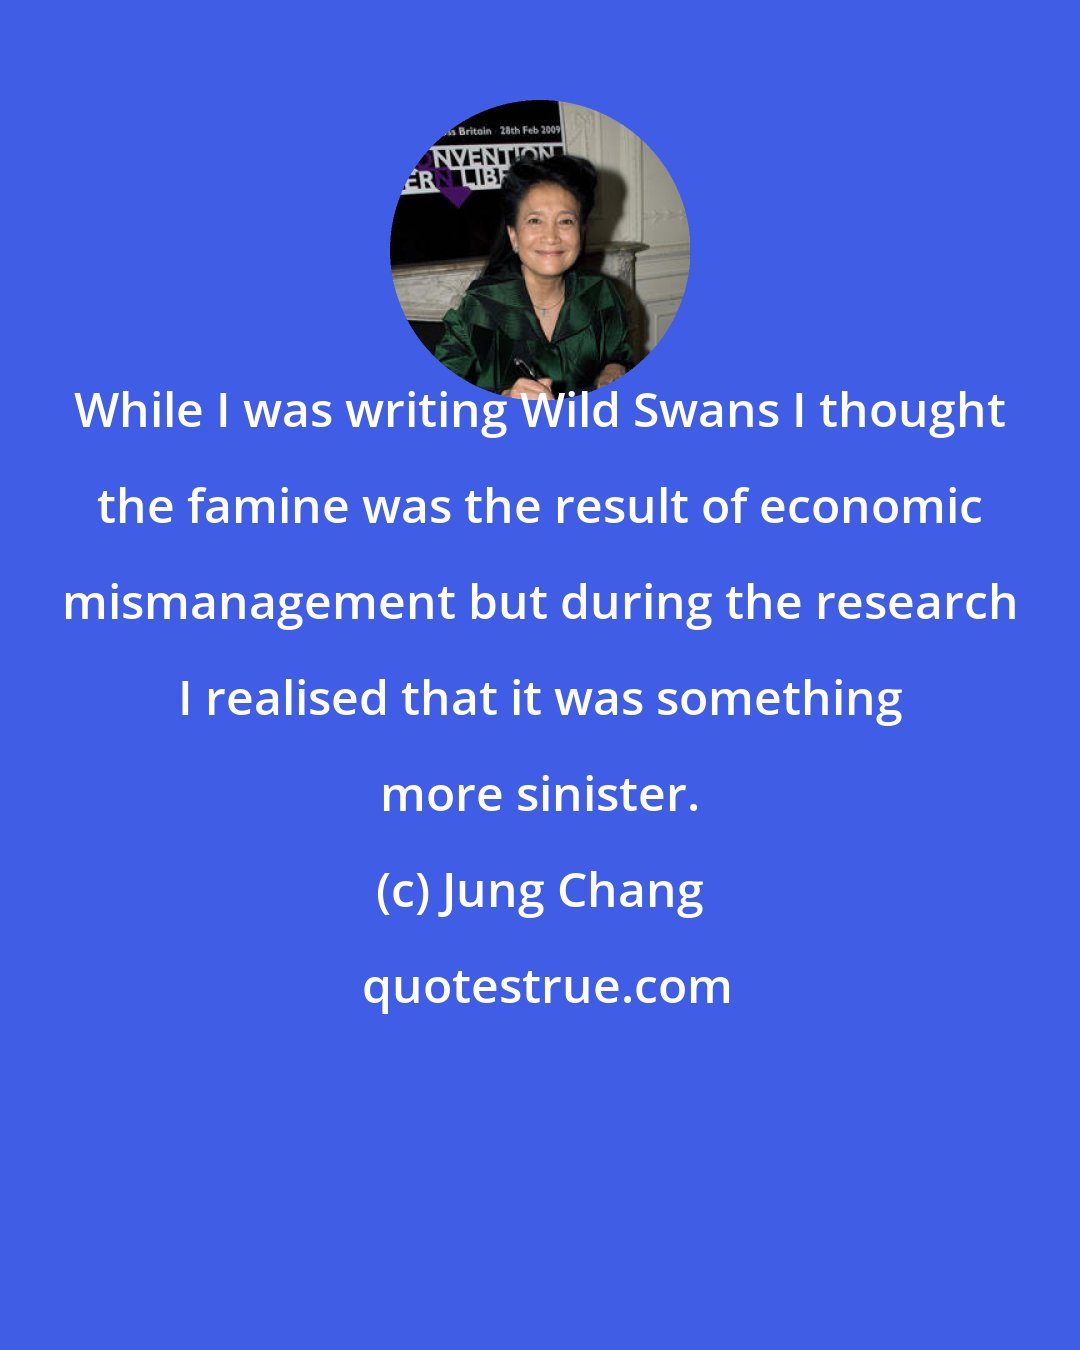 Jung Chang: While I was writing Wild Swans I thought the famine was the result of economic mismanagement but during the research I realised that it was something more sinister.